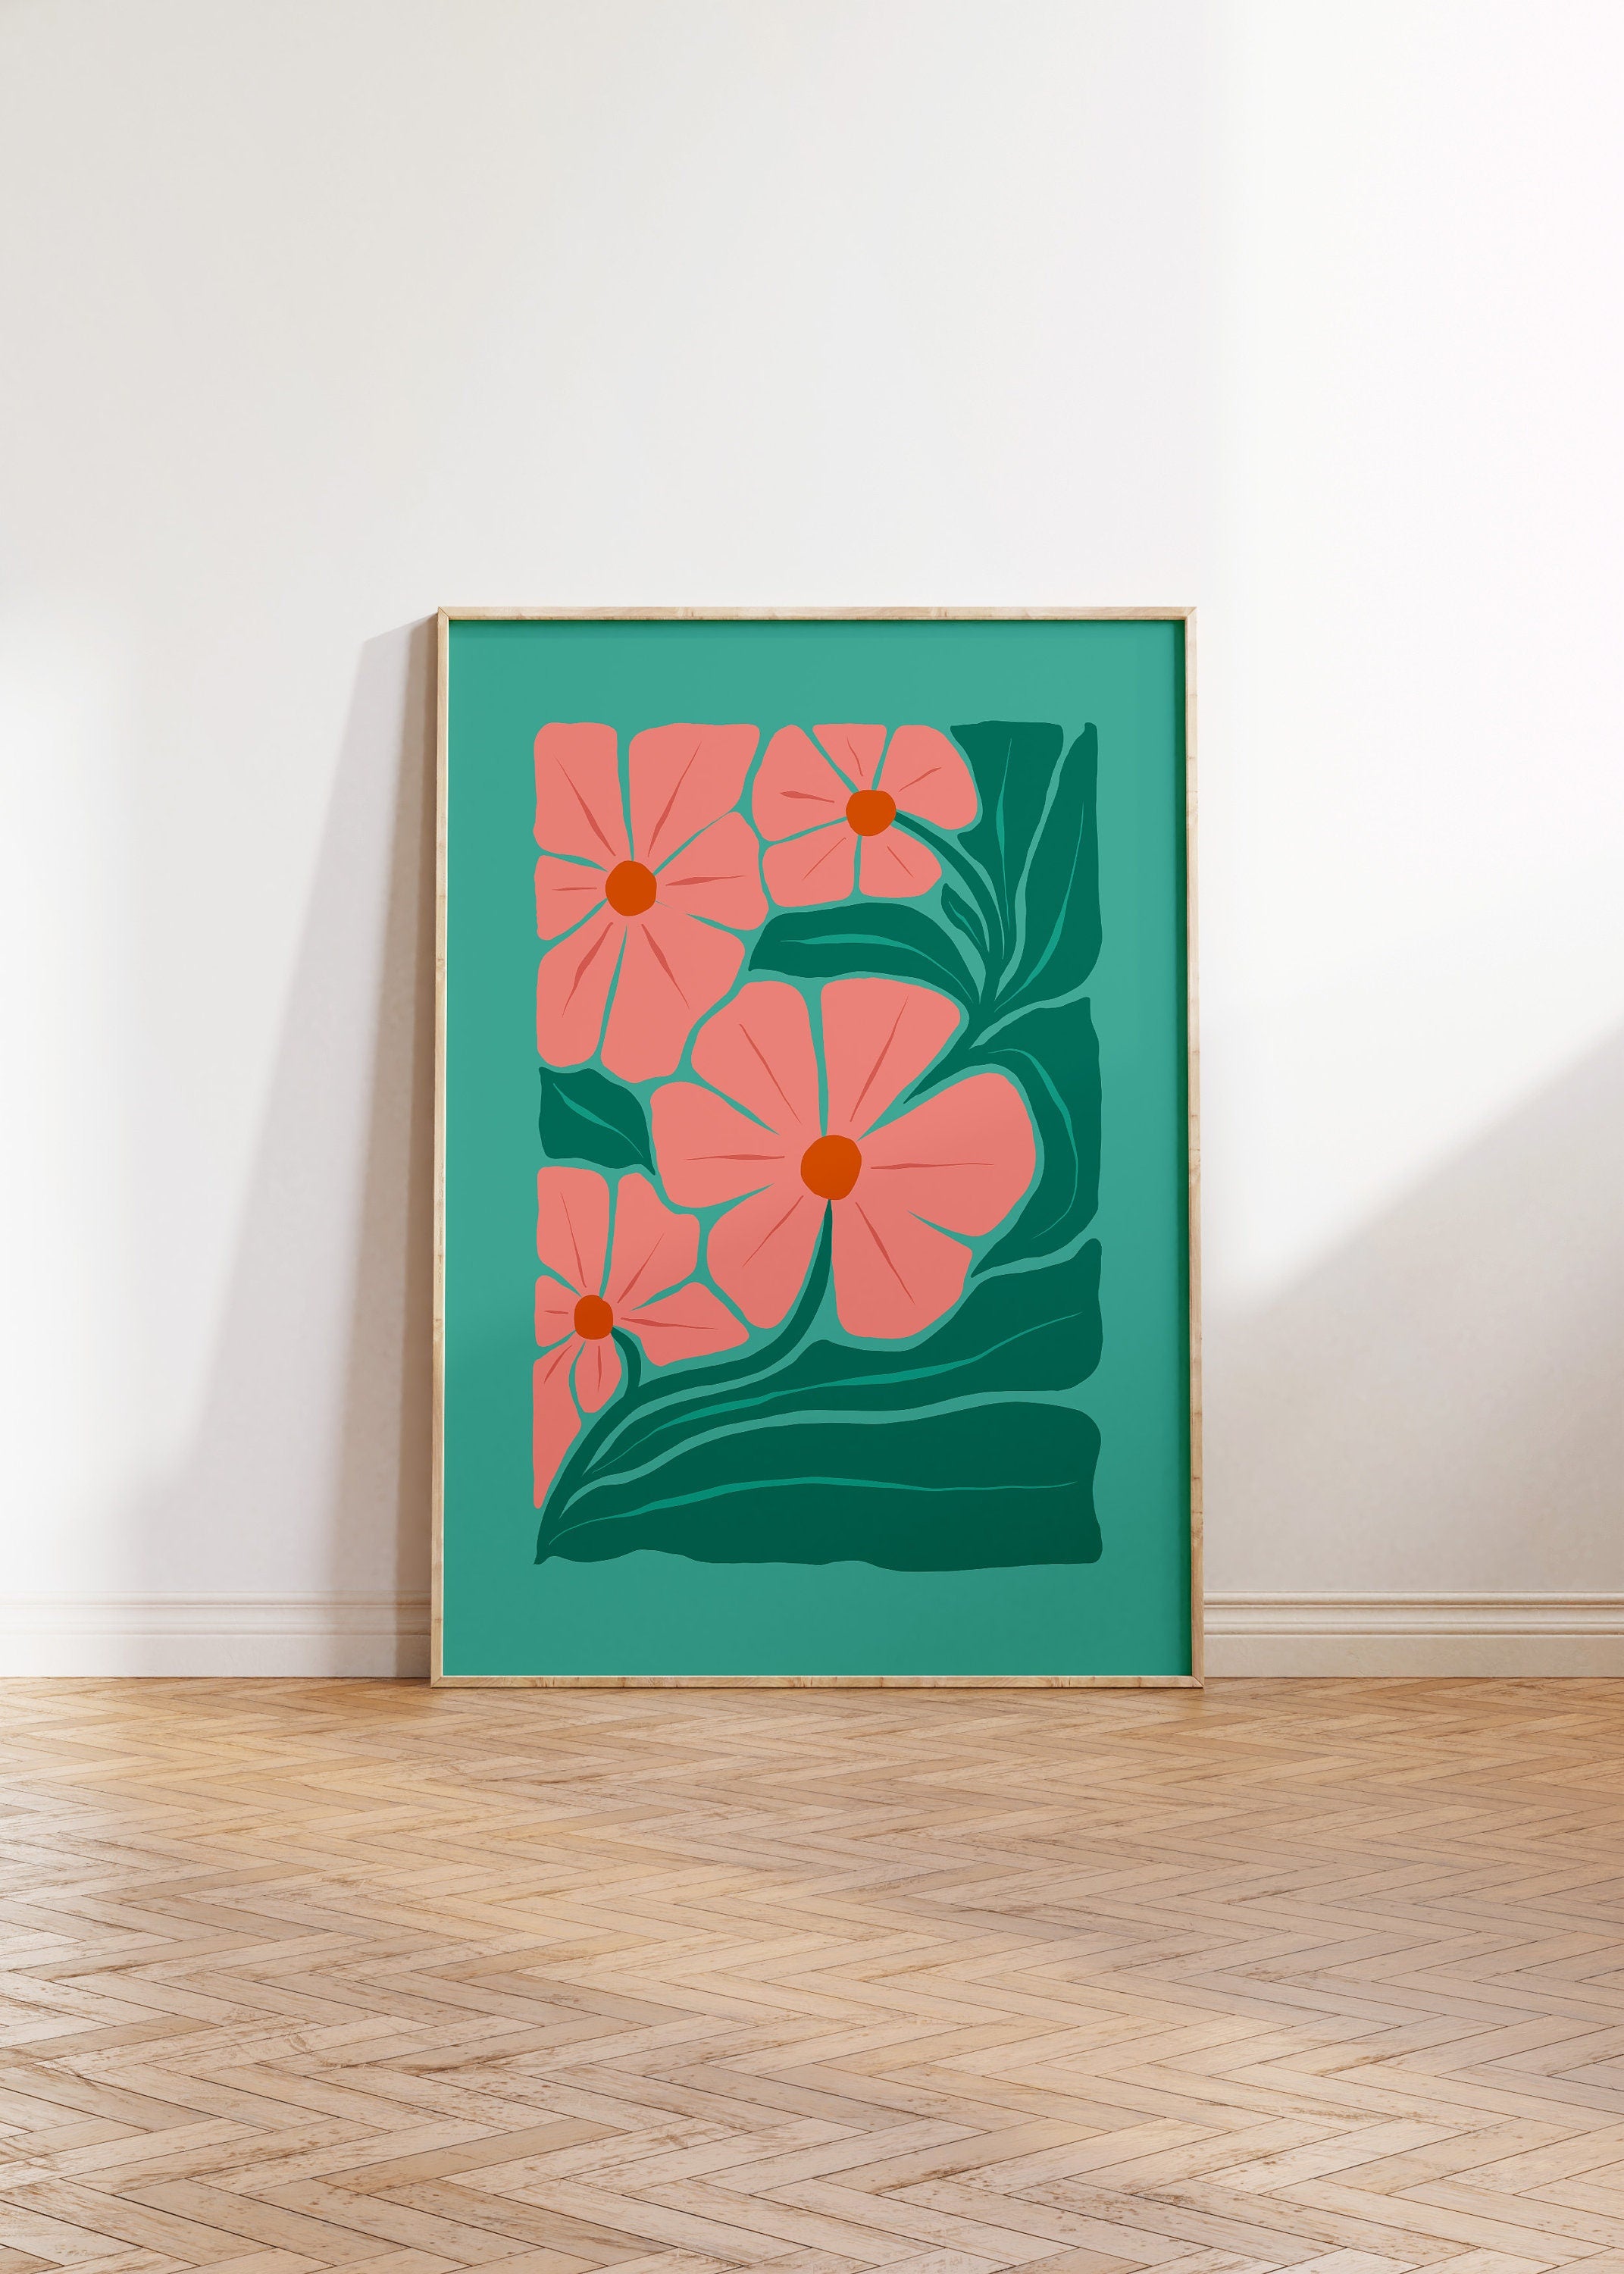 Digital artwork capturing the essence of flowers through abstract brushstrokes and vibrant hues.